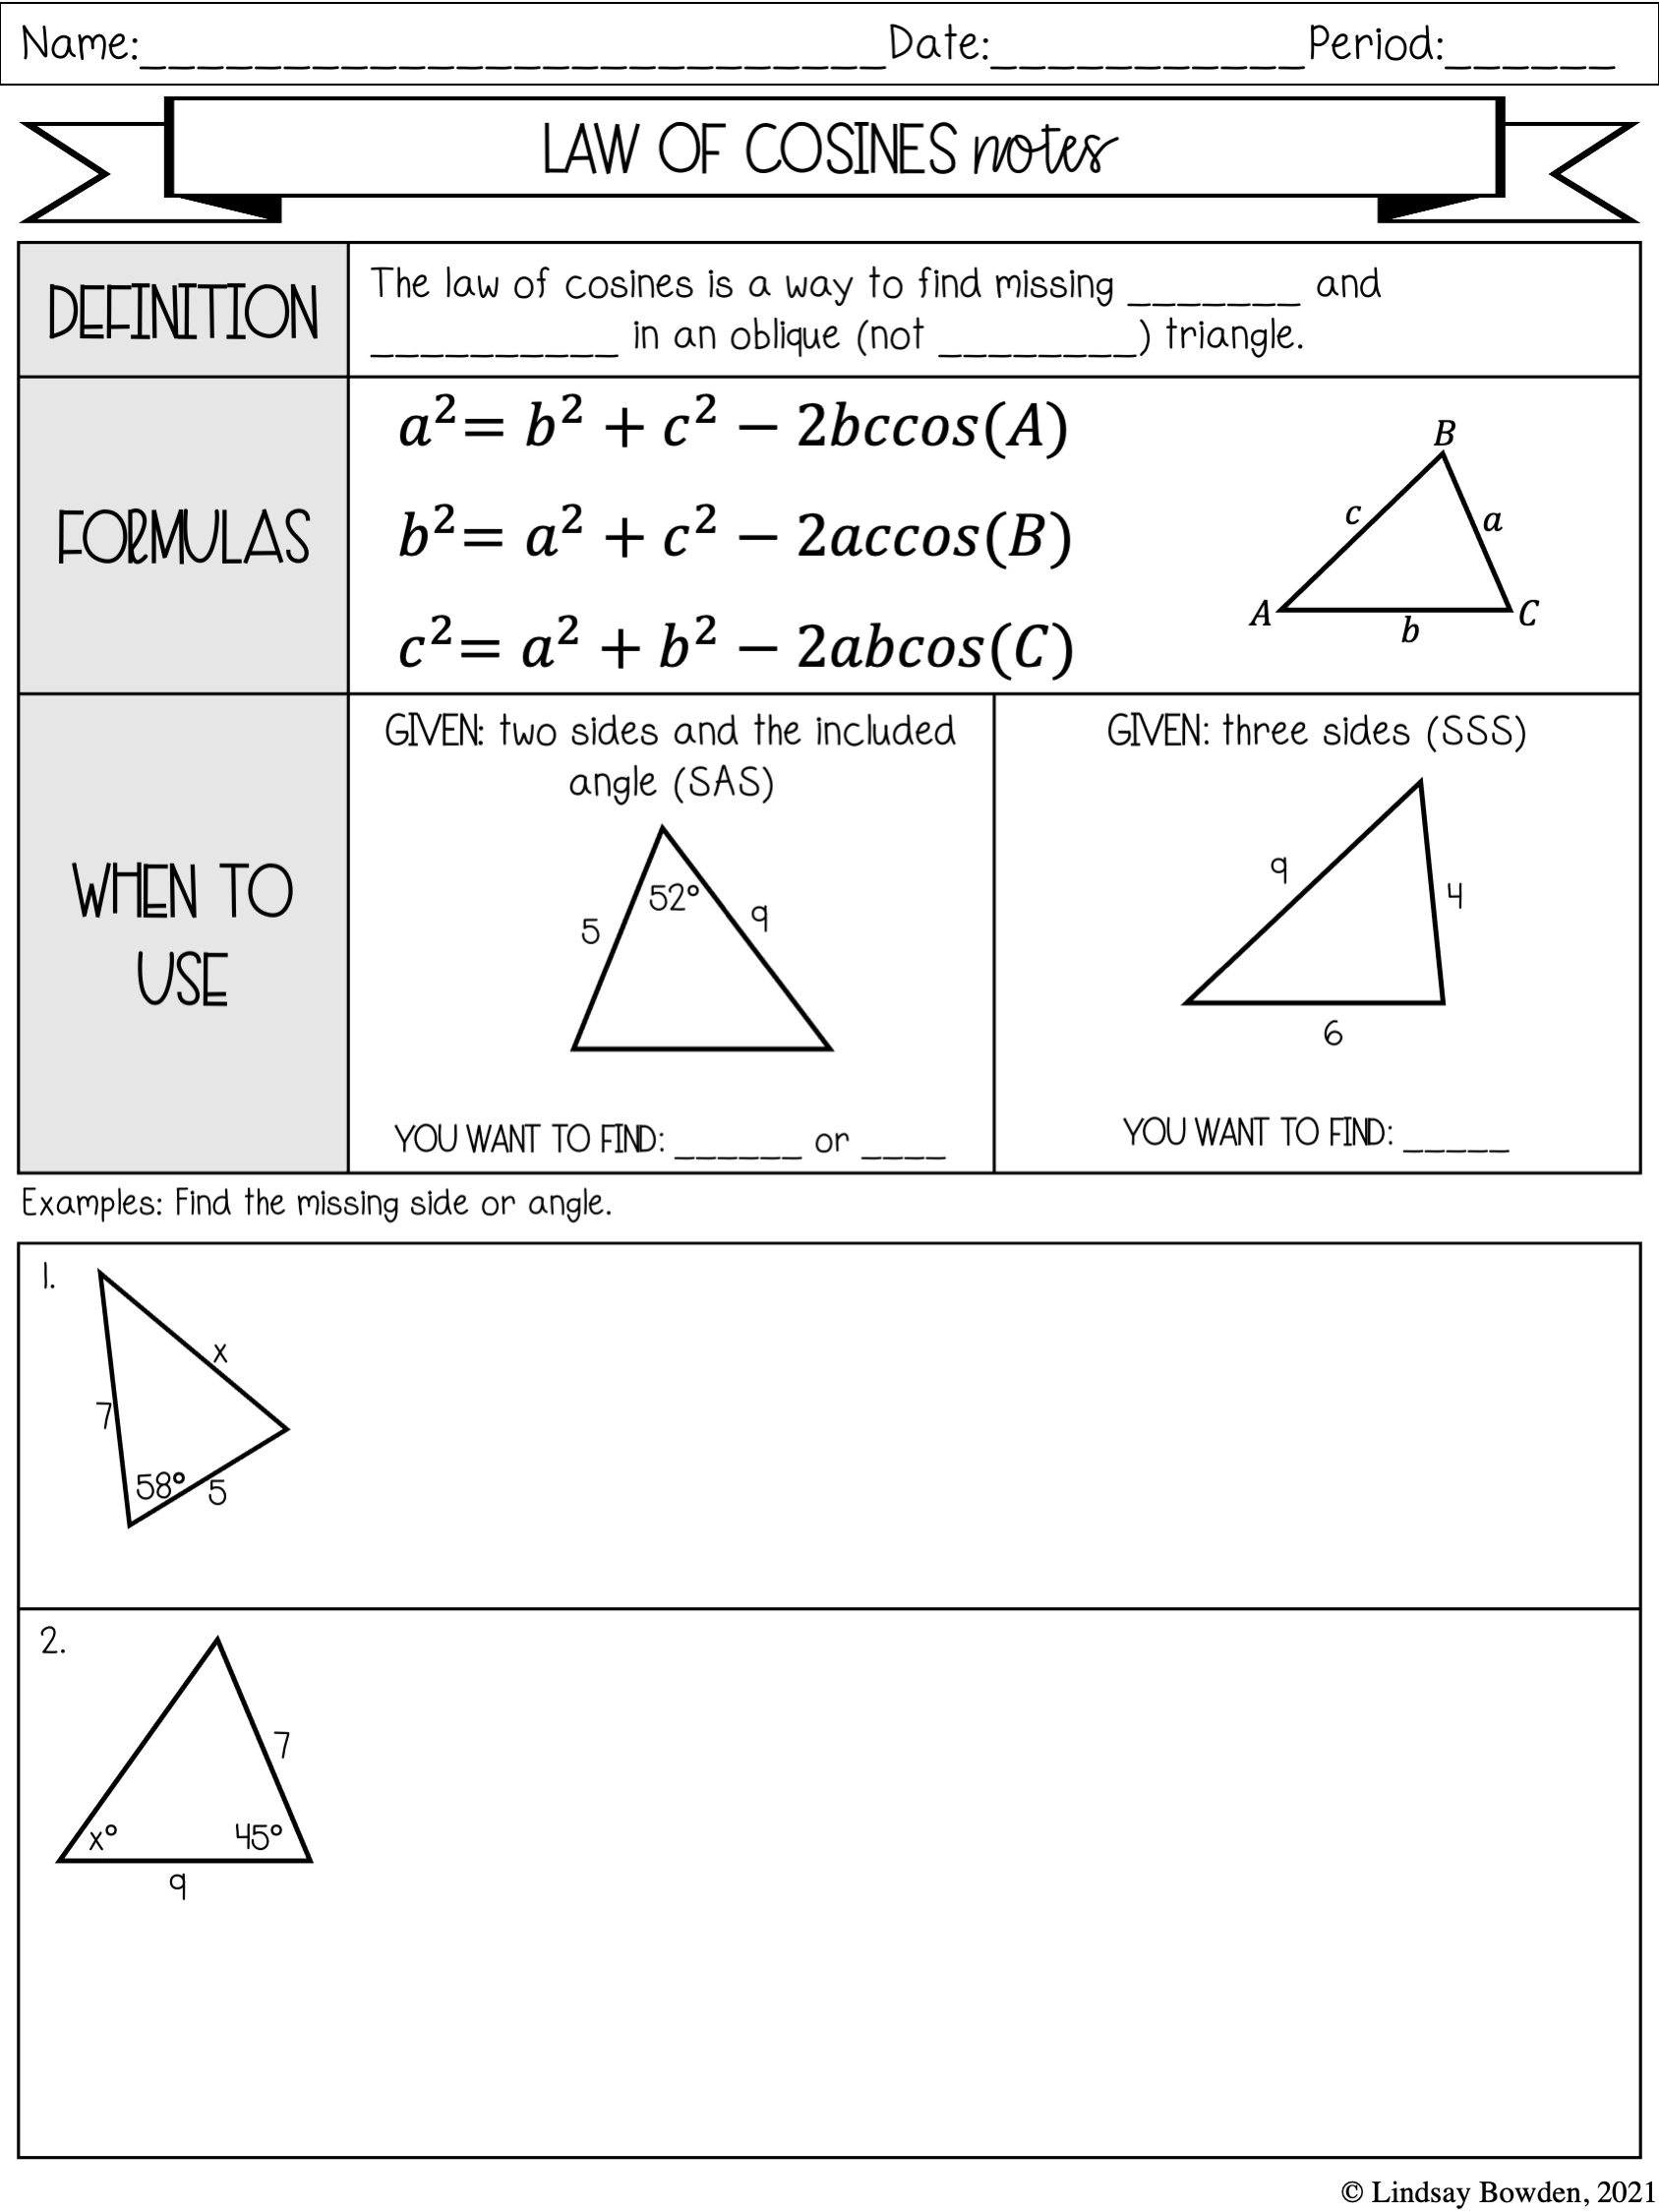 Law of Sines and Cosines Notes and Worksheets - Lindsay Bowden In Law Of Sines Worksheet